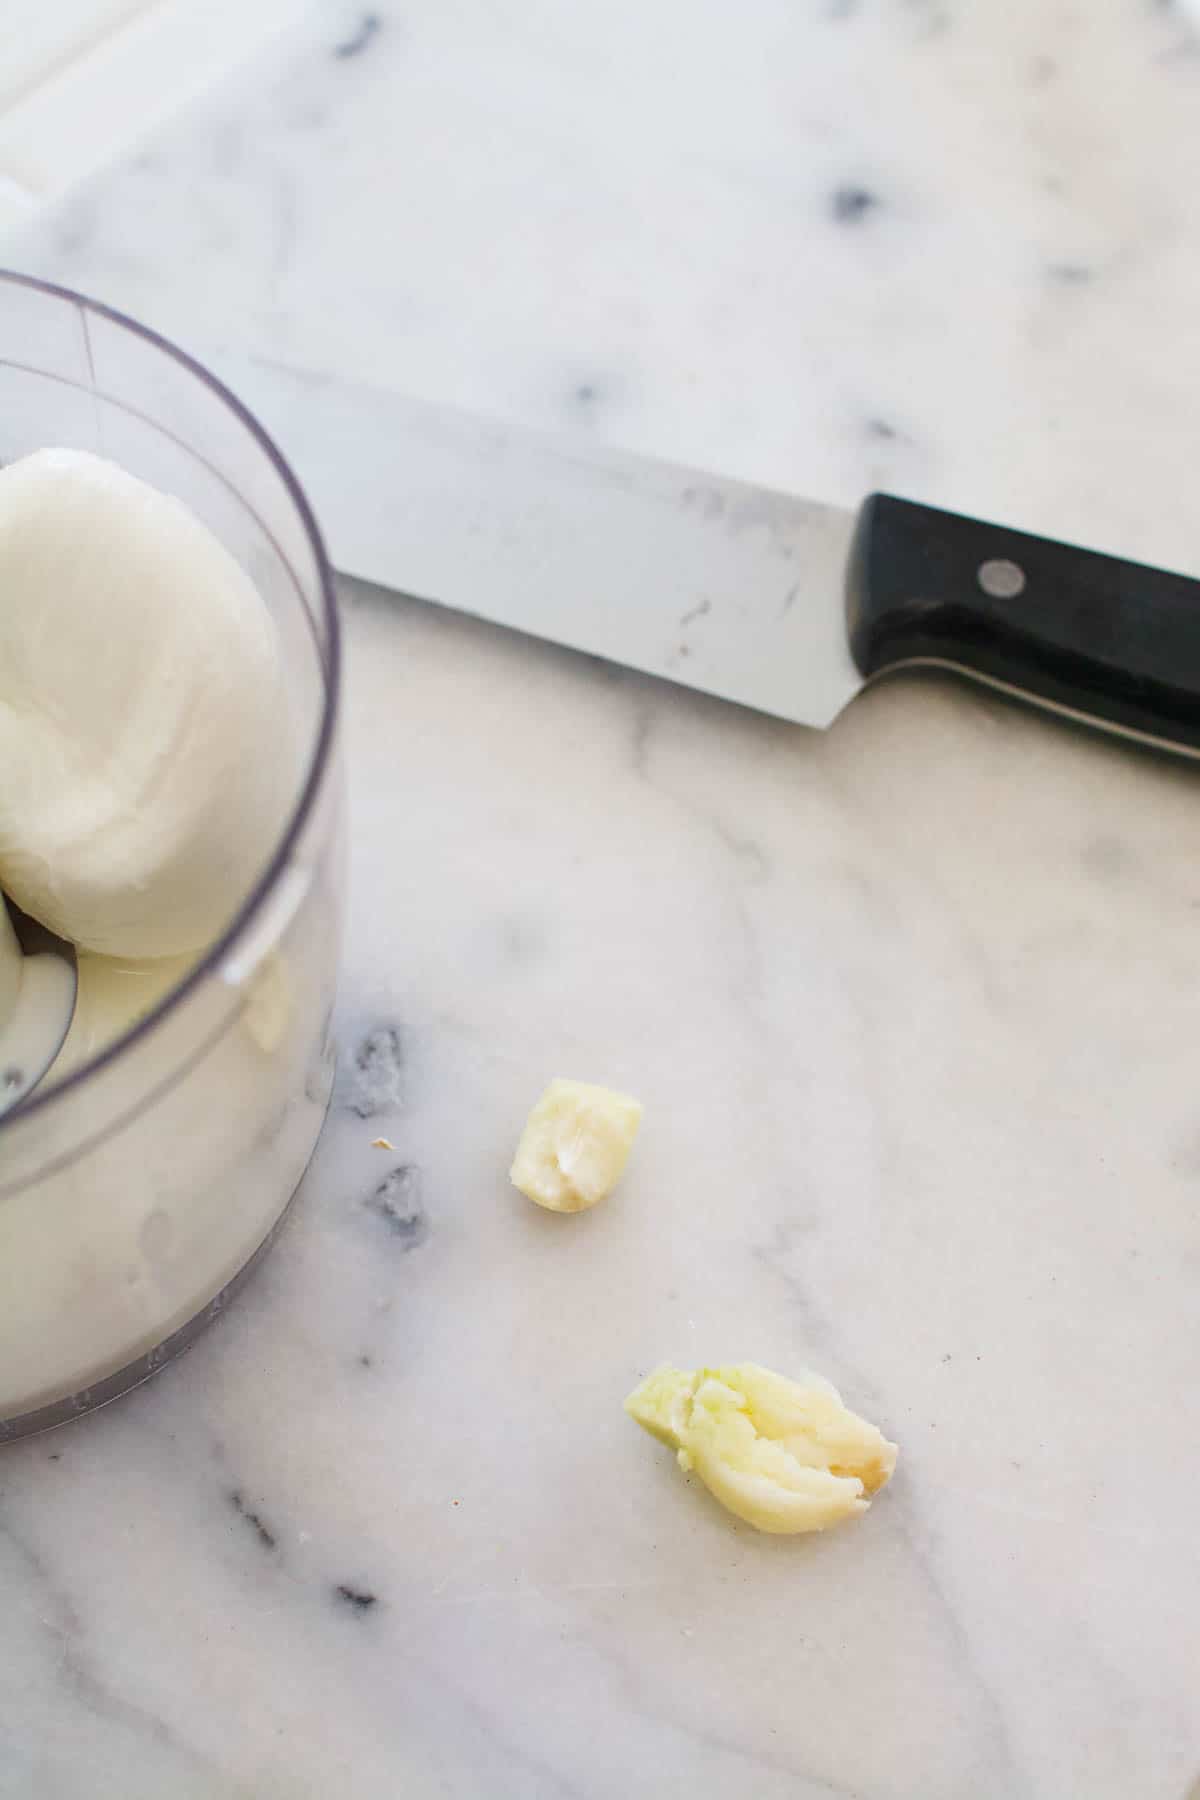 A smashed clove of garlic on a marble counter top between a kitchen knife and a food processor bowl.